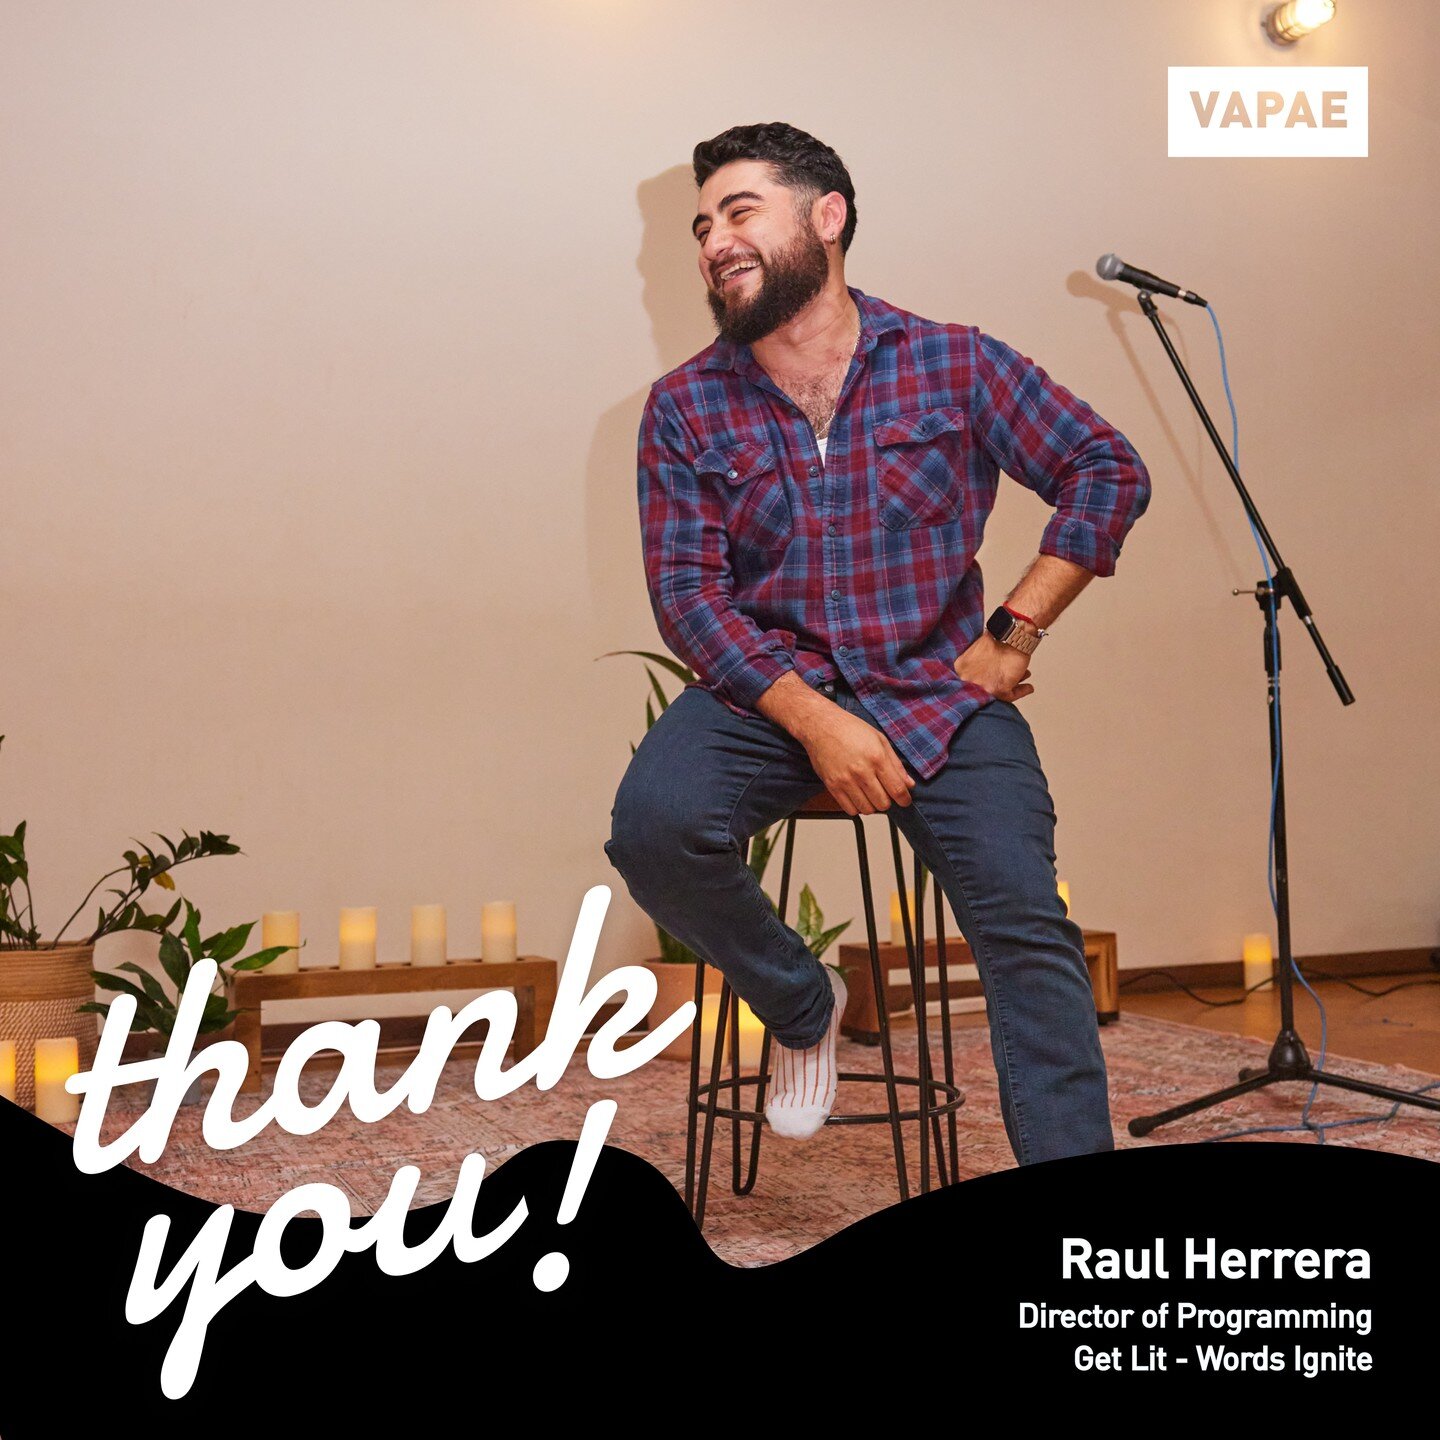 Thank you to the fabulous Raul Herrera for presenting such an engaging workshop in Arts Ed 108 this week! 🌟 Raul brings a deep understanding of poetry writing pedagogies tailored for youth. He led our students in an interactive creative writing and 